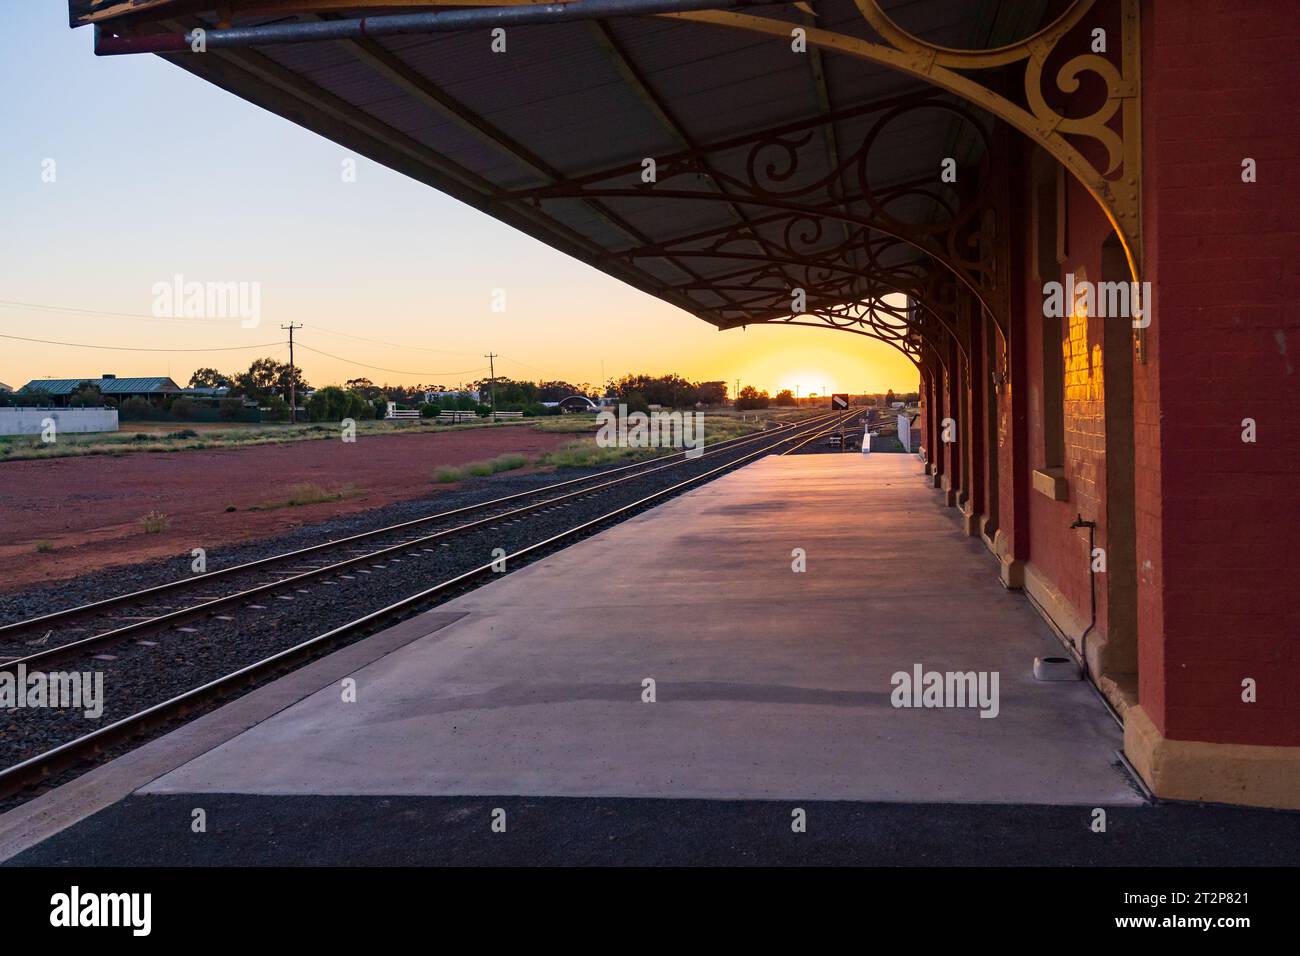 The Sun rising at the end of a long empty railway station platform at Cobar in New South Wales, Australia Stock Photo